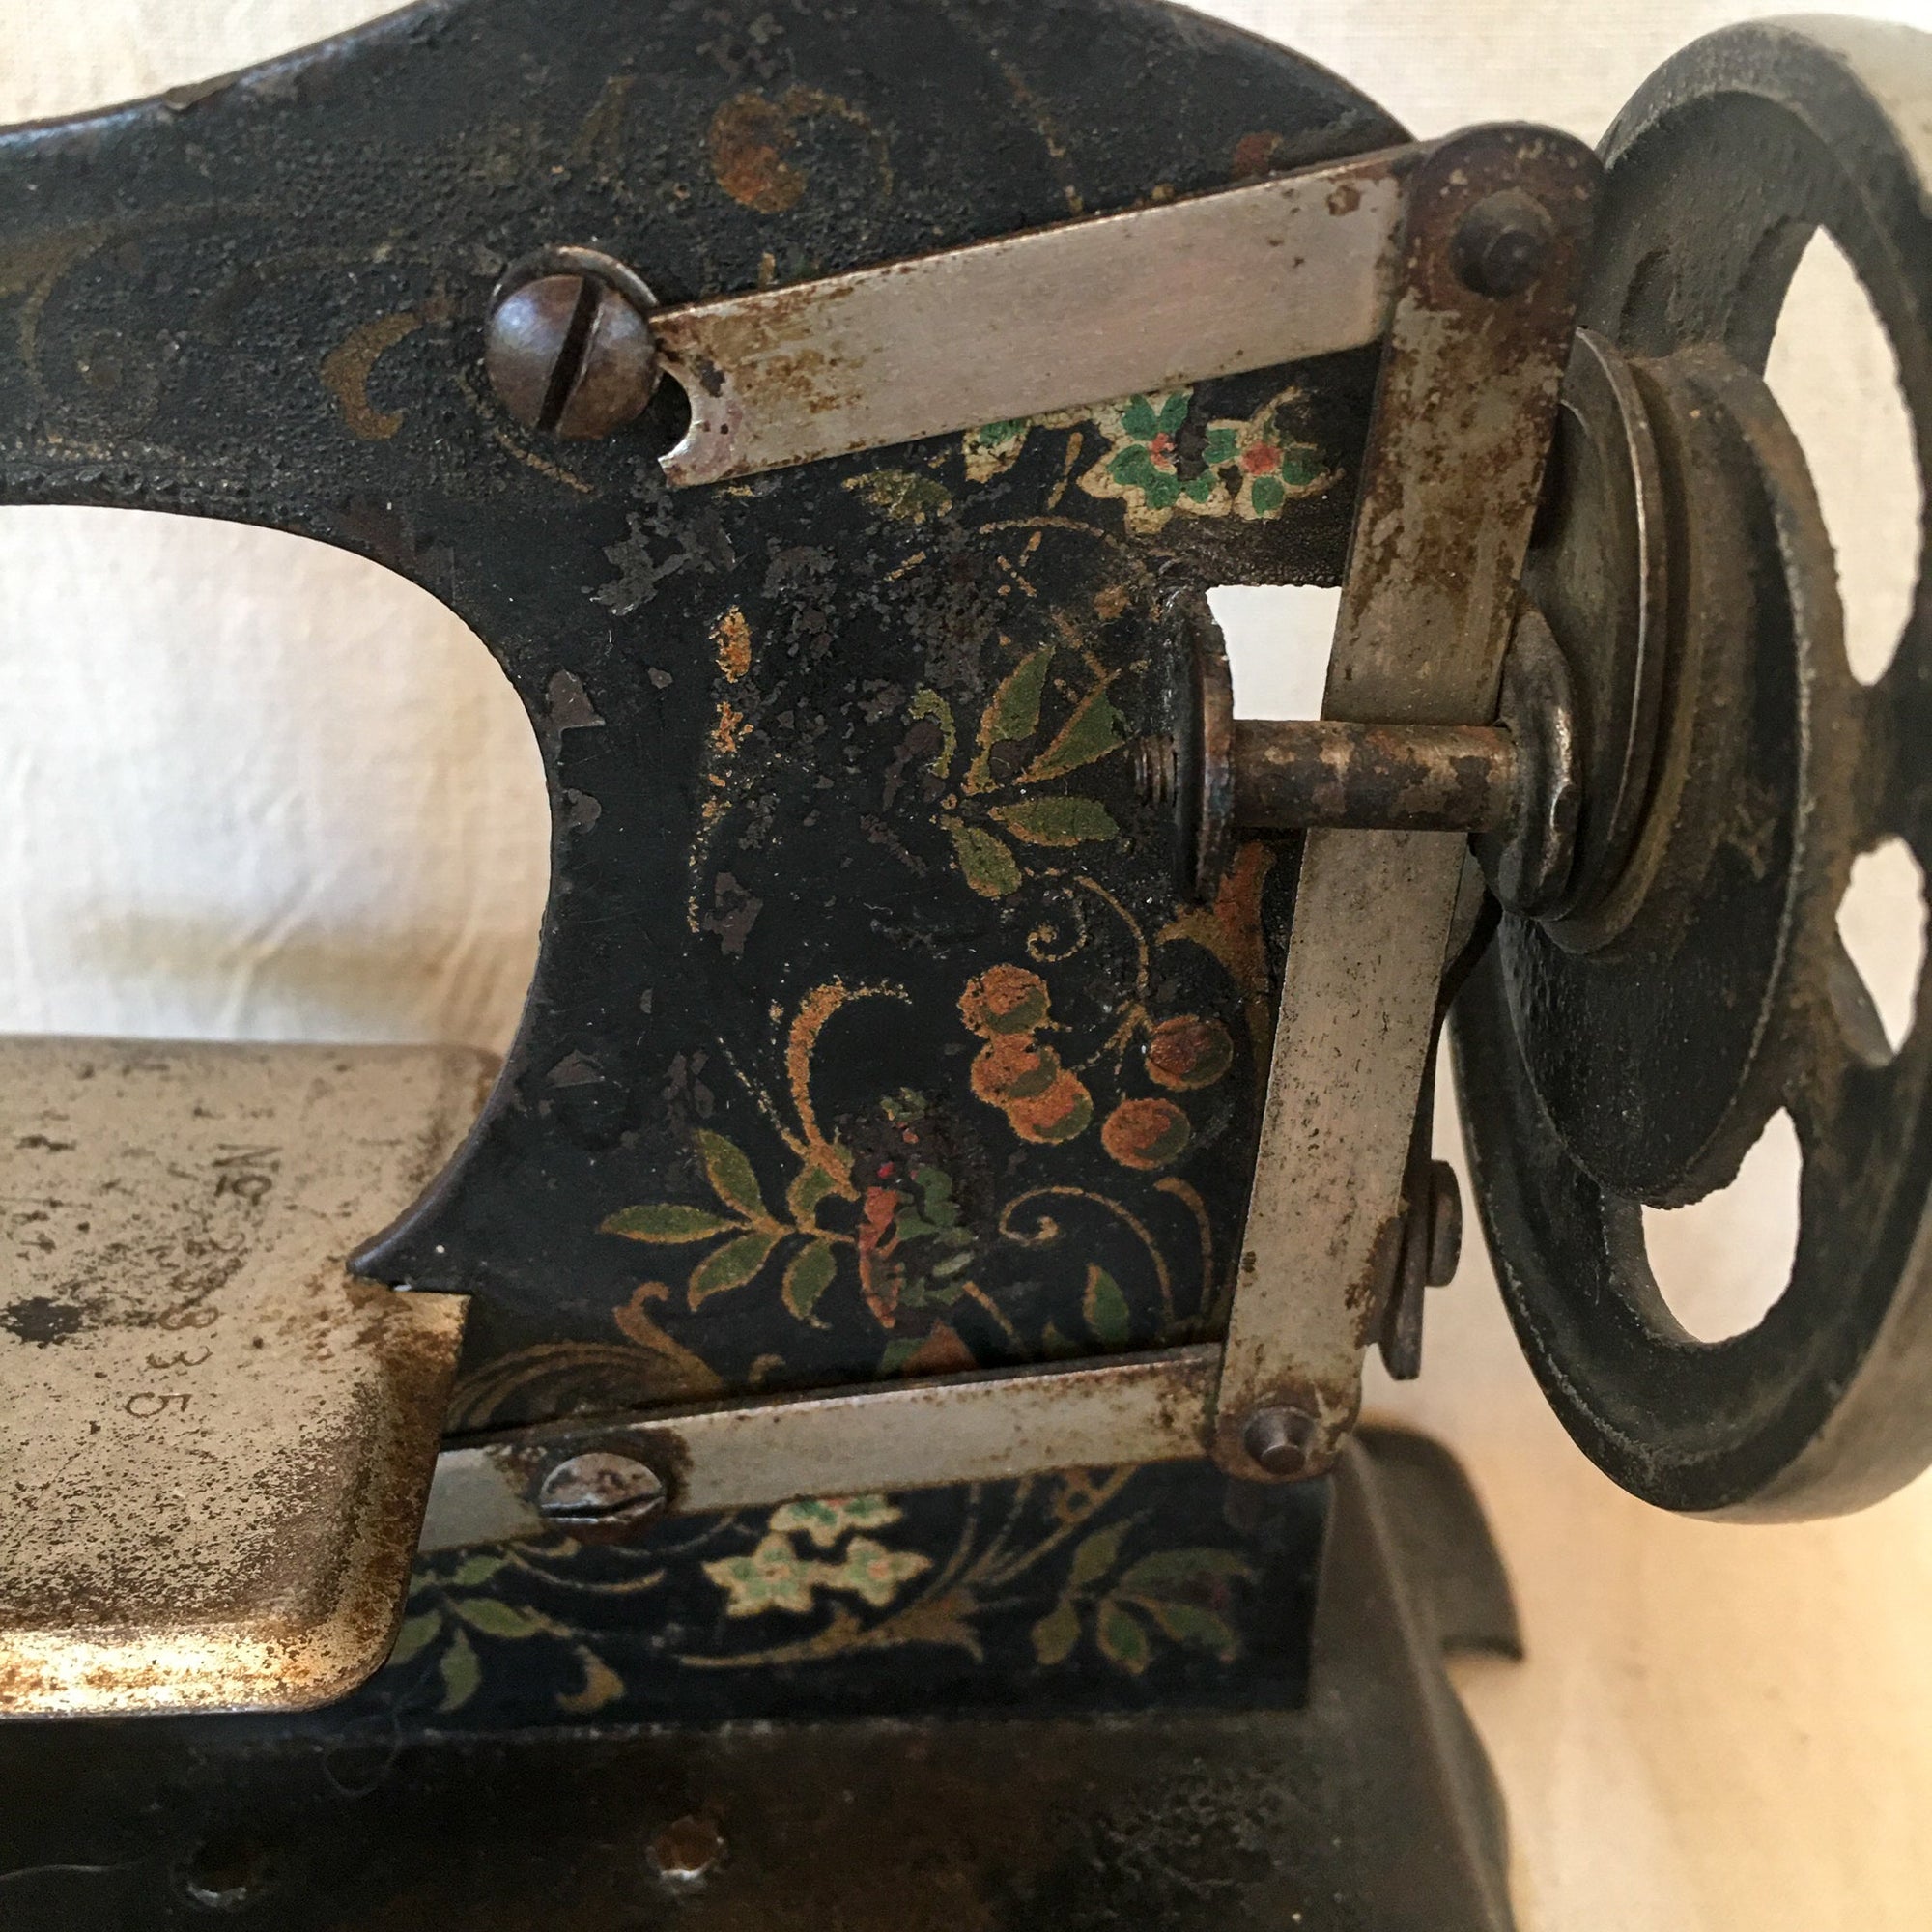 Early 1900’s Toy Sewing Machine